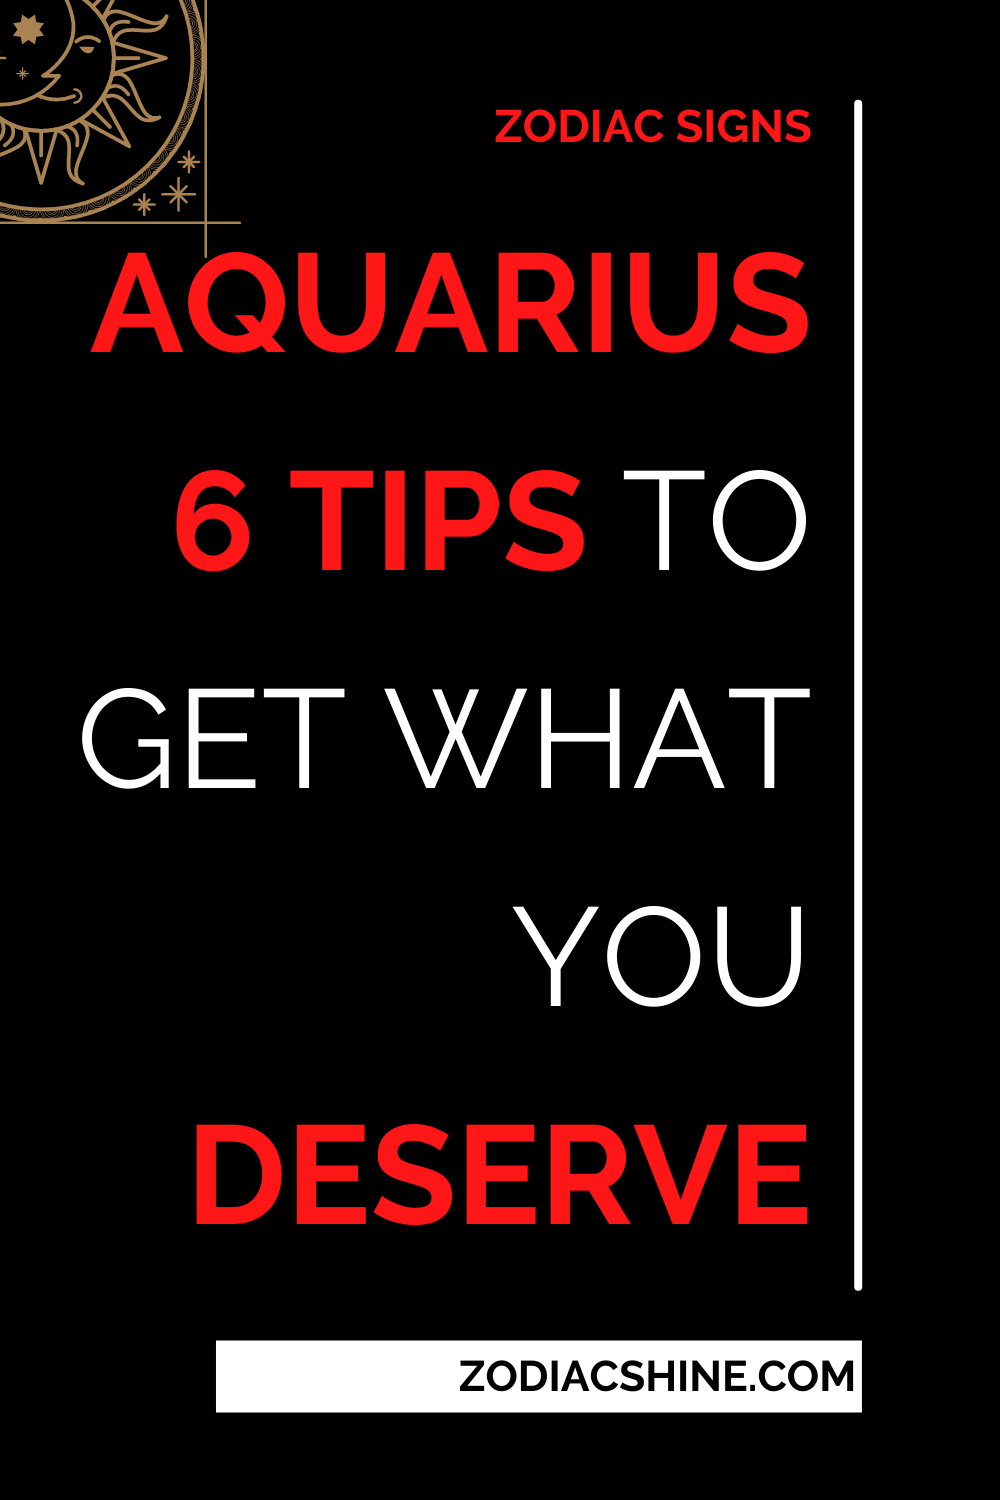 Aquarius 6 Tips To Get What You Deserve